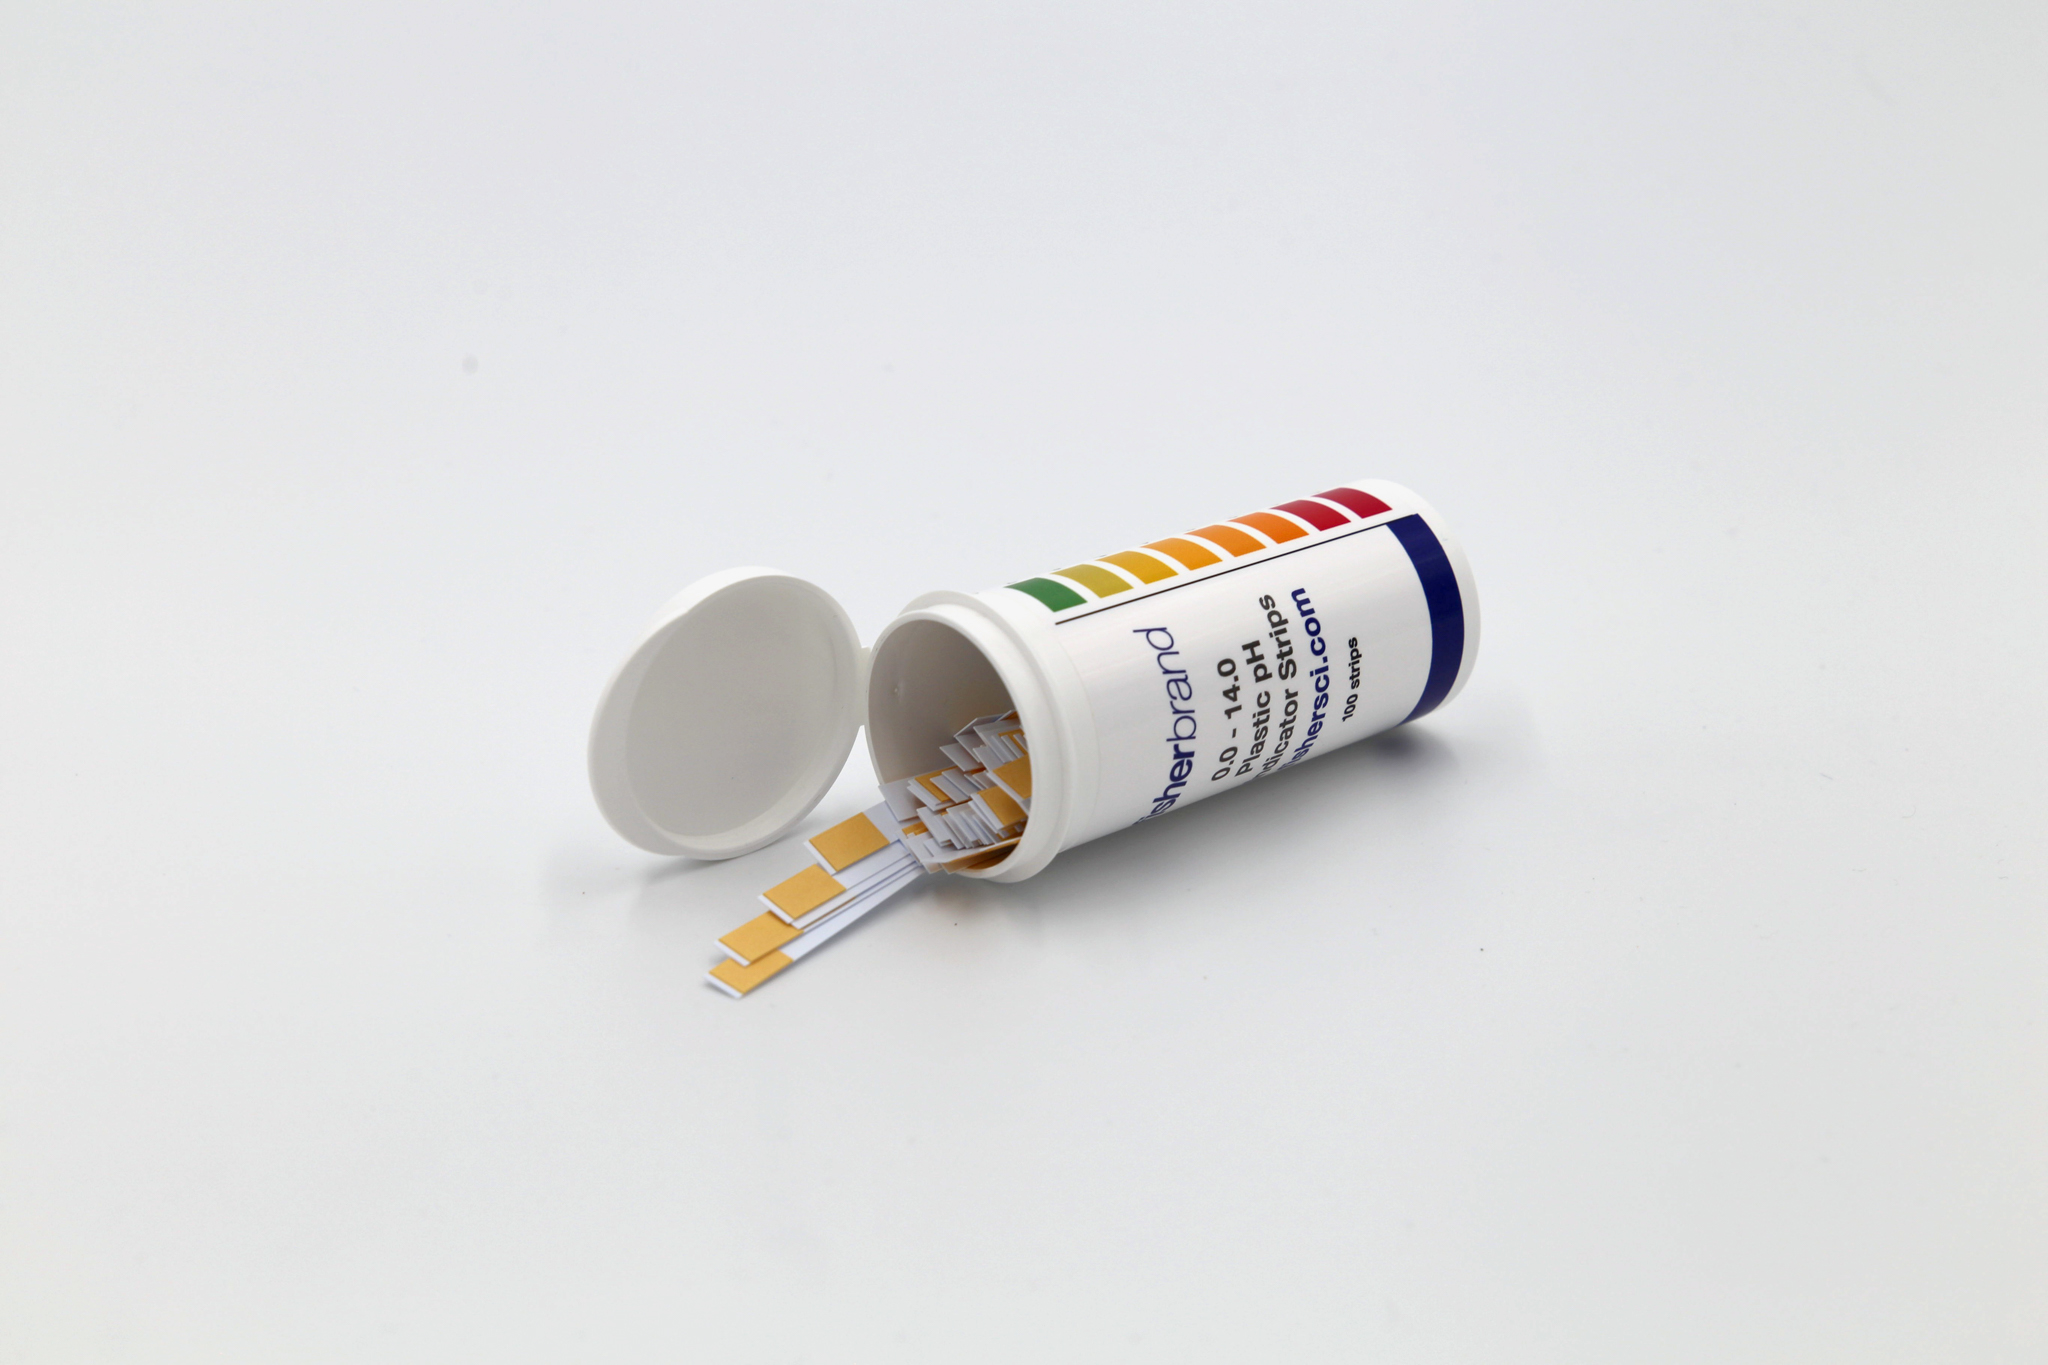 Small opened canister of ph strips on a white background